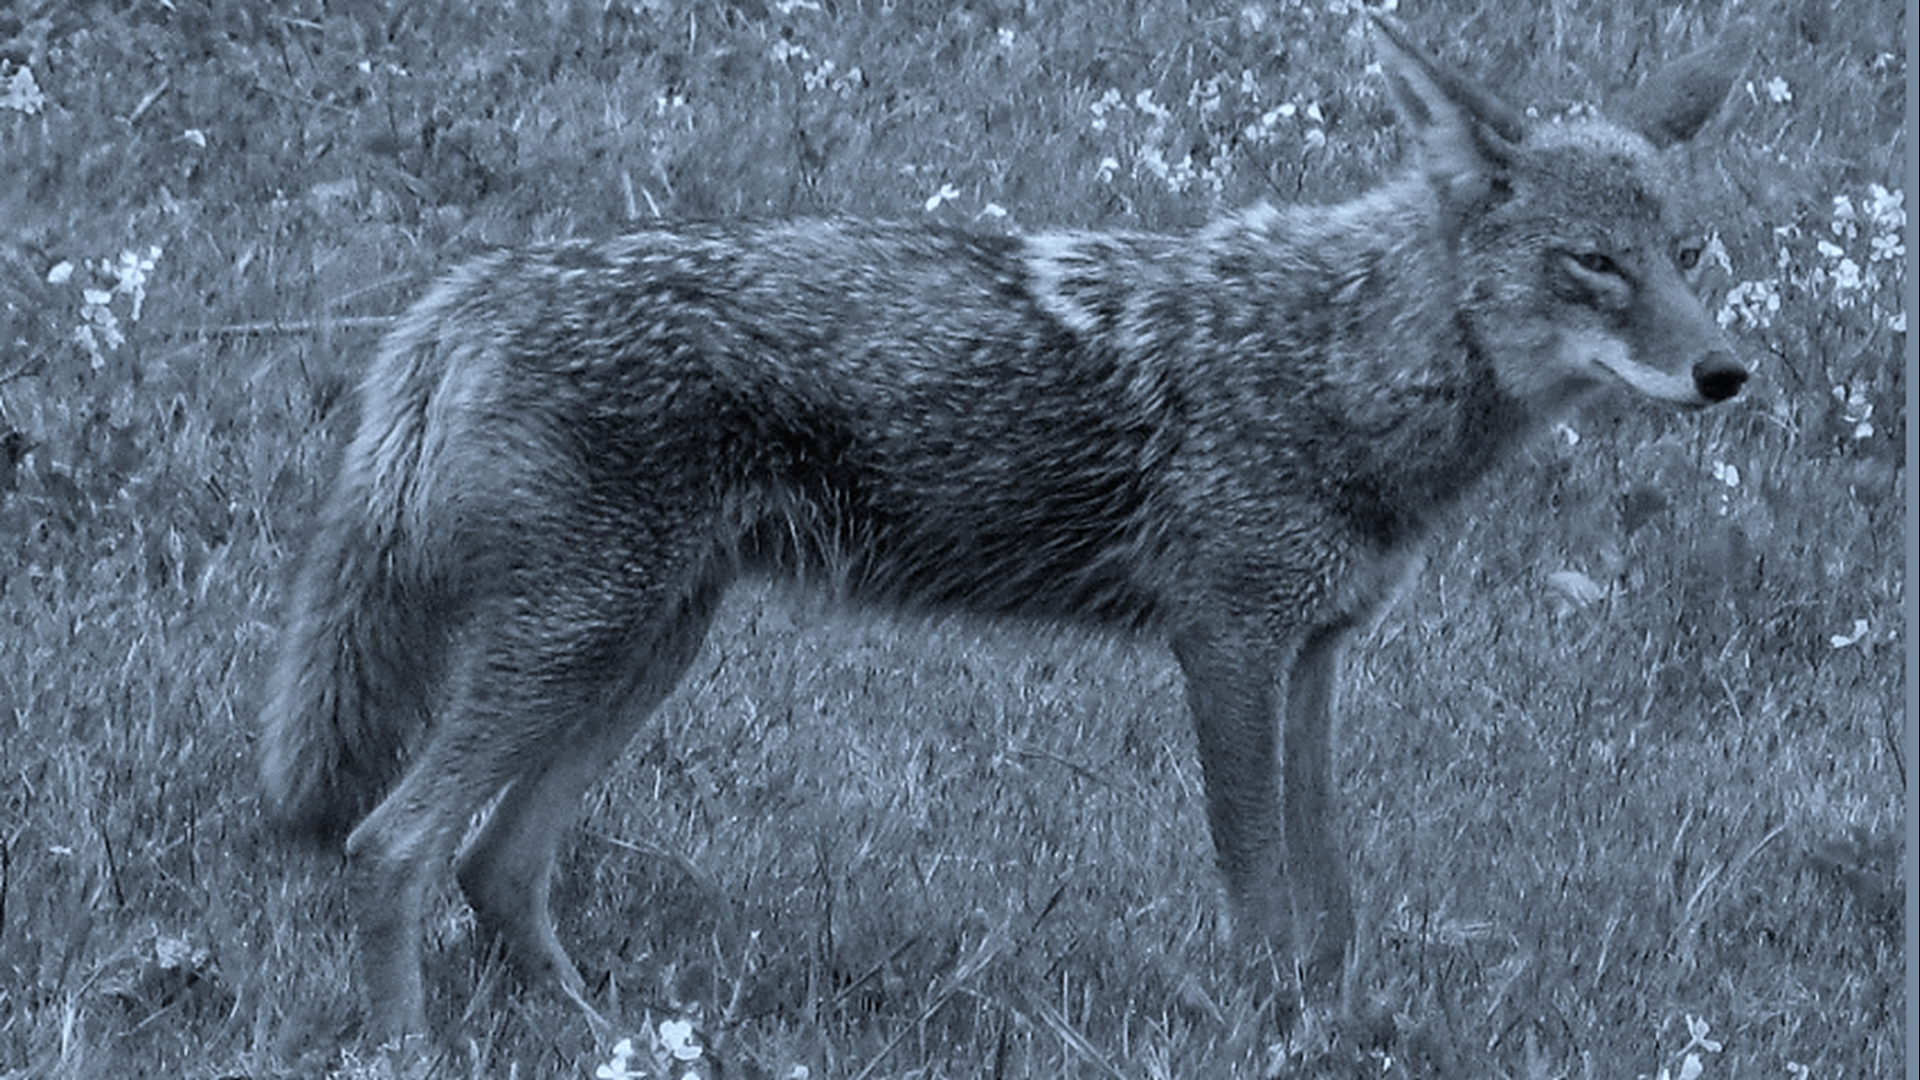 Dr. Chris Mowry, a biologist at Berry College near Rome, helped create “The Coyote Project.”